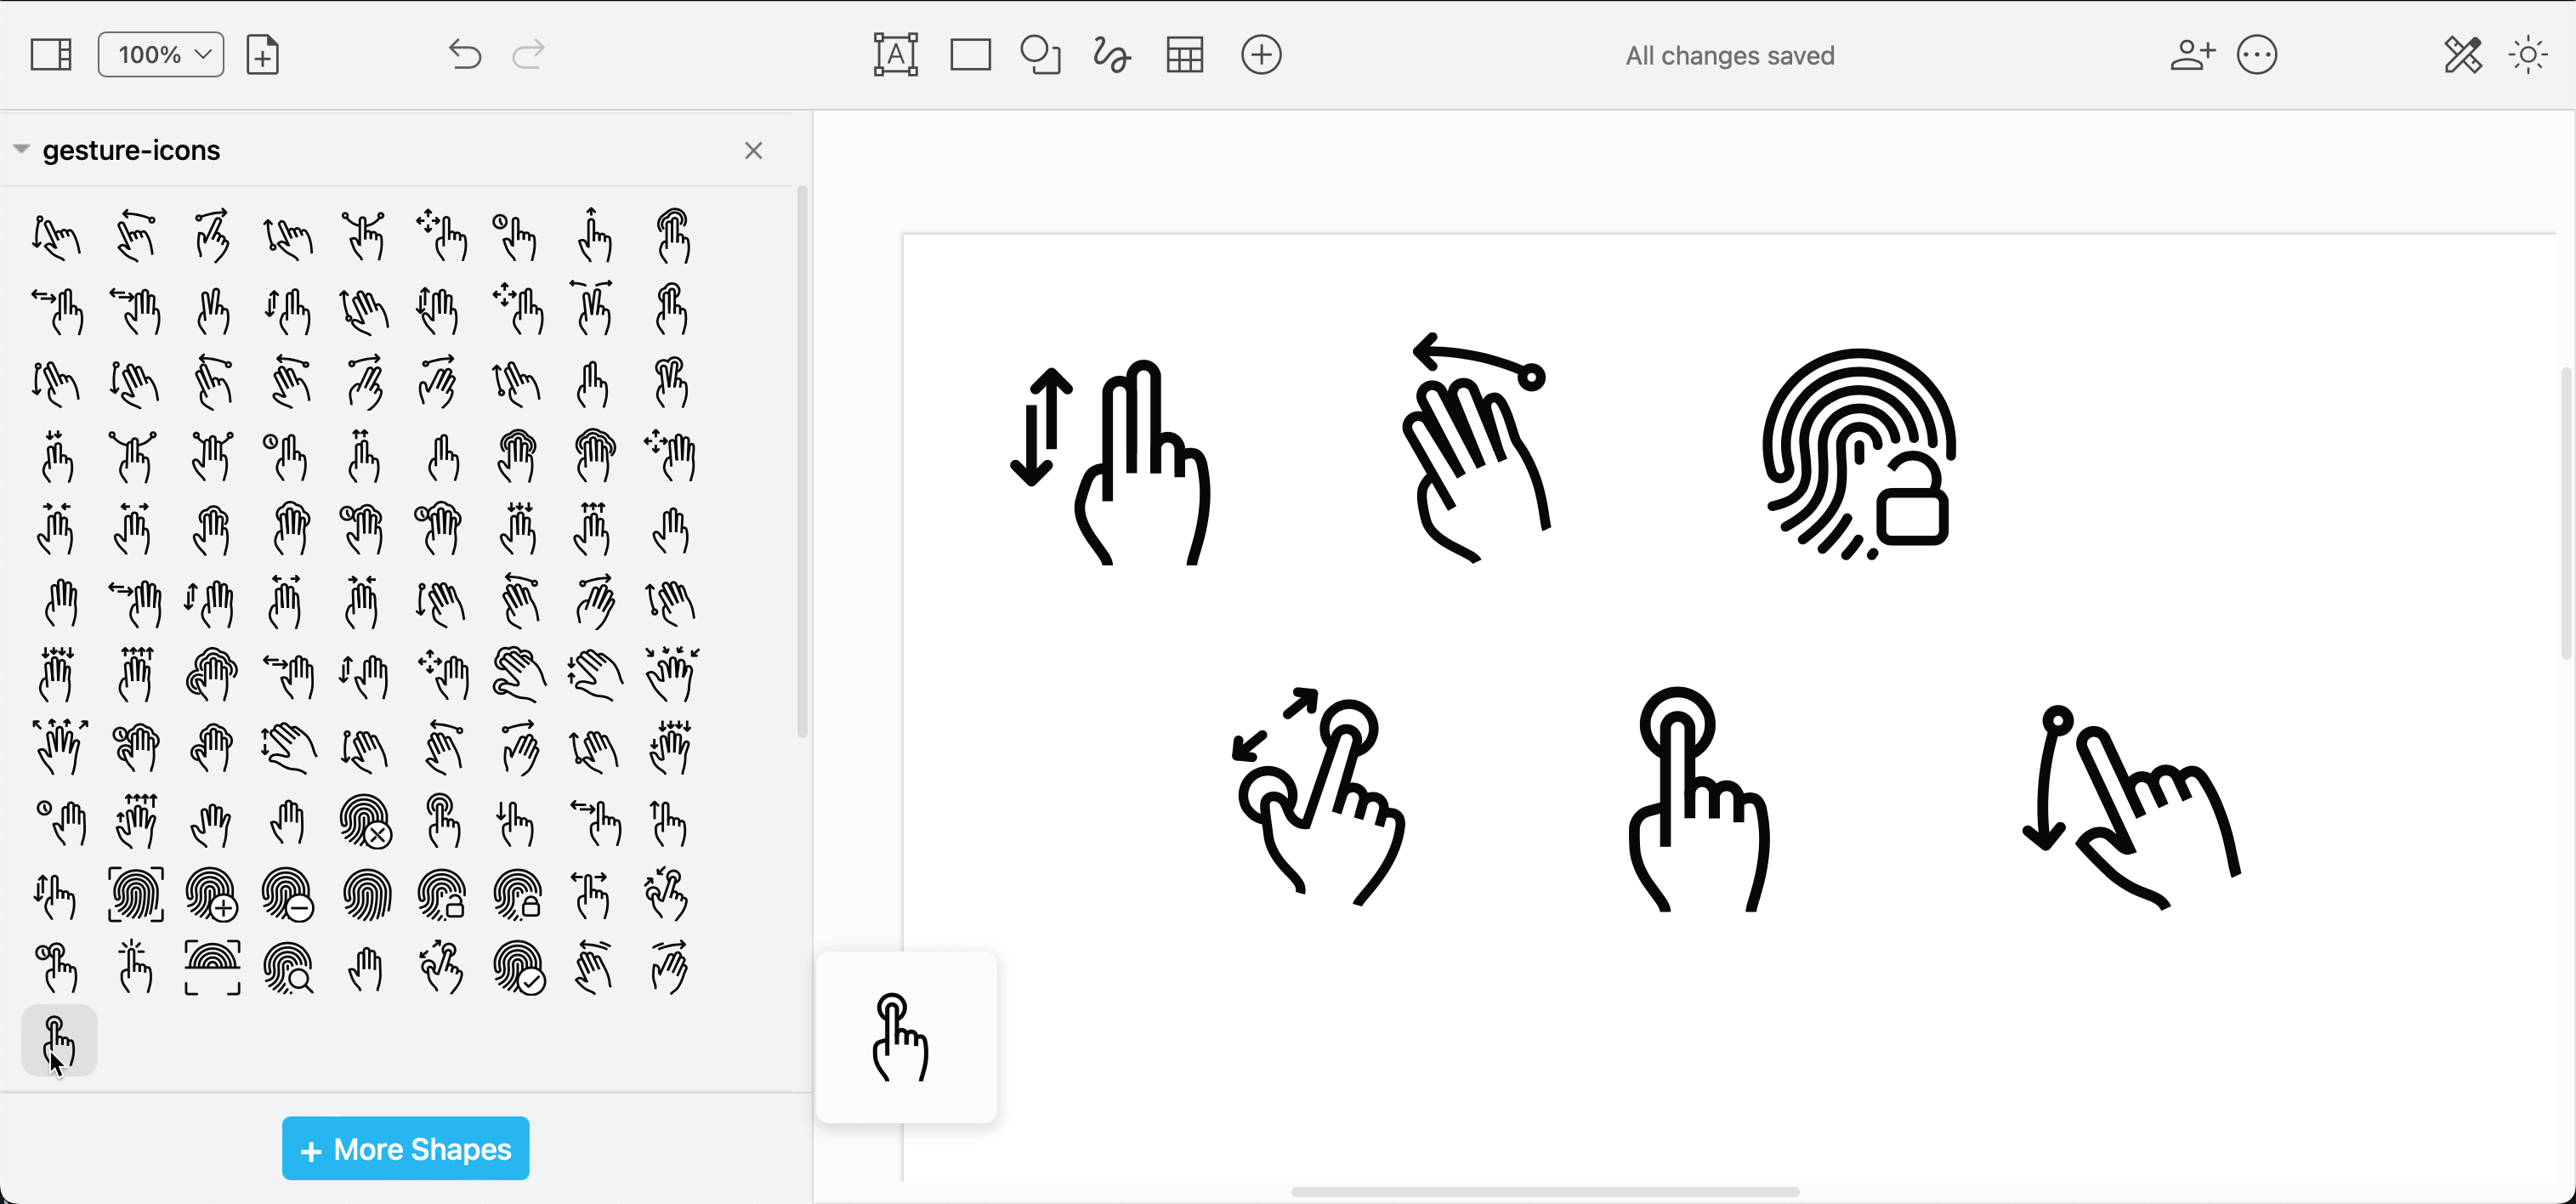 Open the gesture icons custom shape library in draw.io from the drawio-libs Github repository